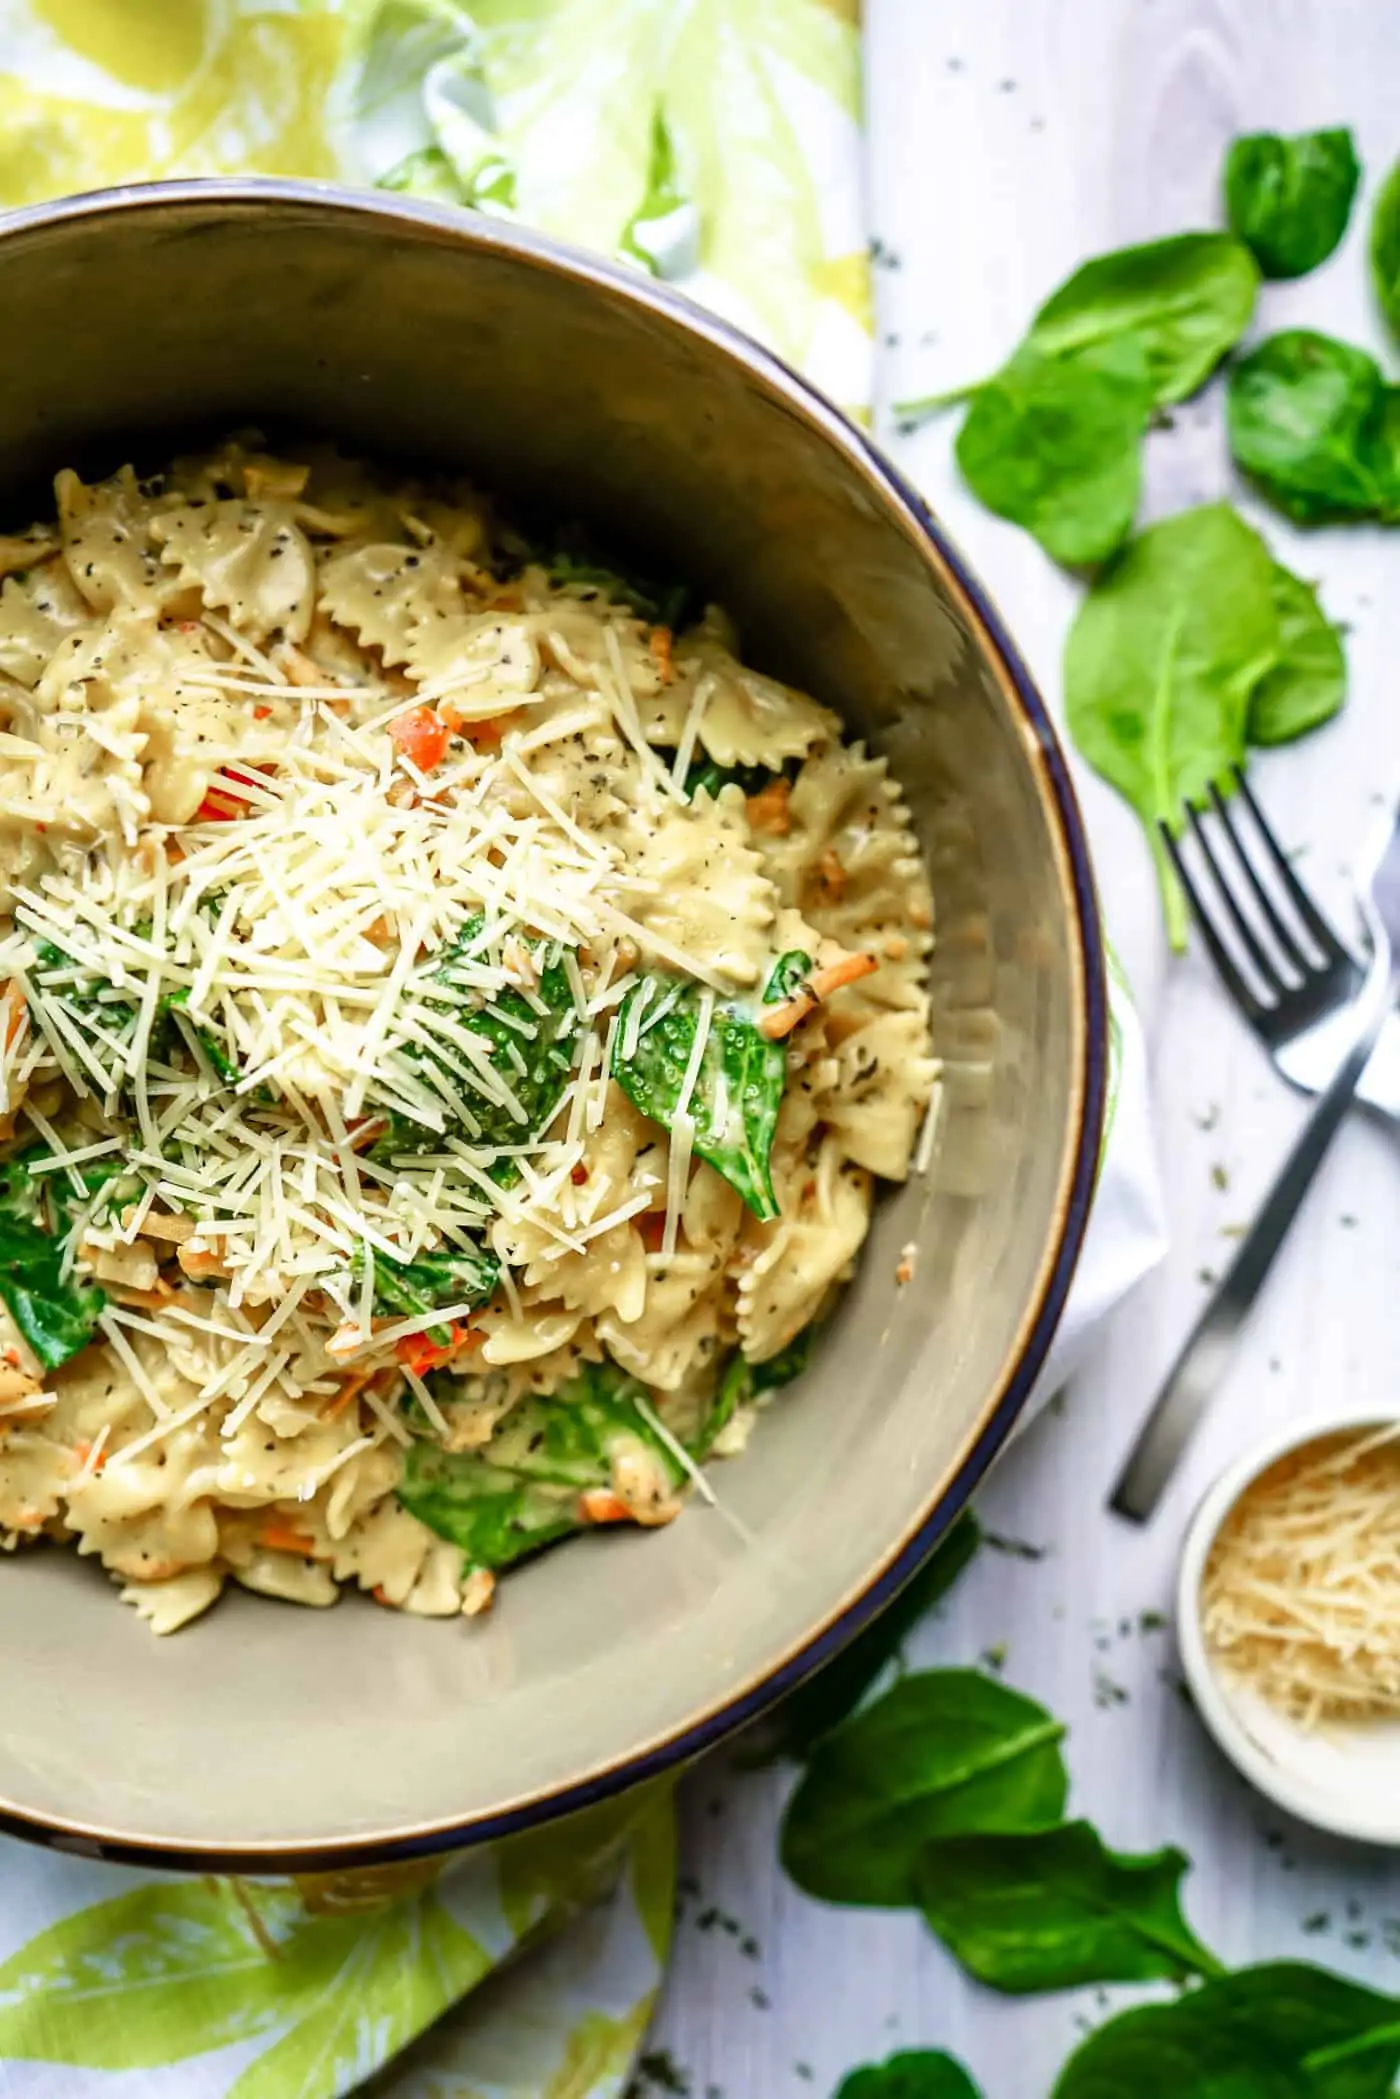 What better way to get in your veggies than with this delicious, keto-friendly and vegan Instant Pot Pasta Primavera. It's the perfect dinner tonight! Give it a try and let us know what you think! 